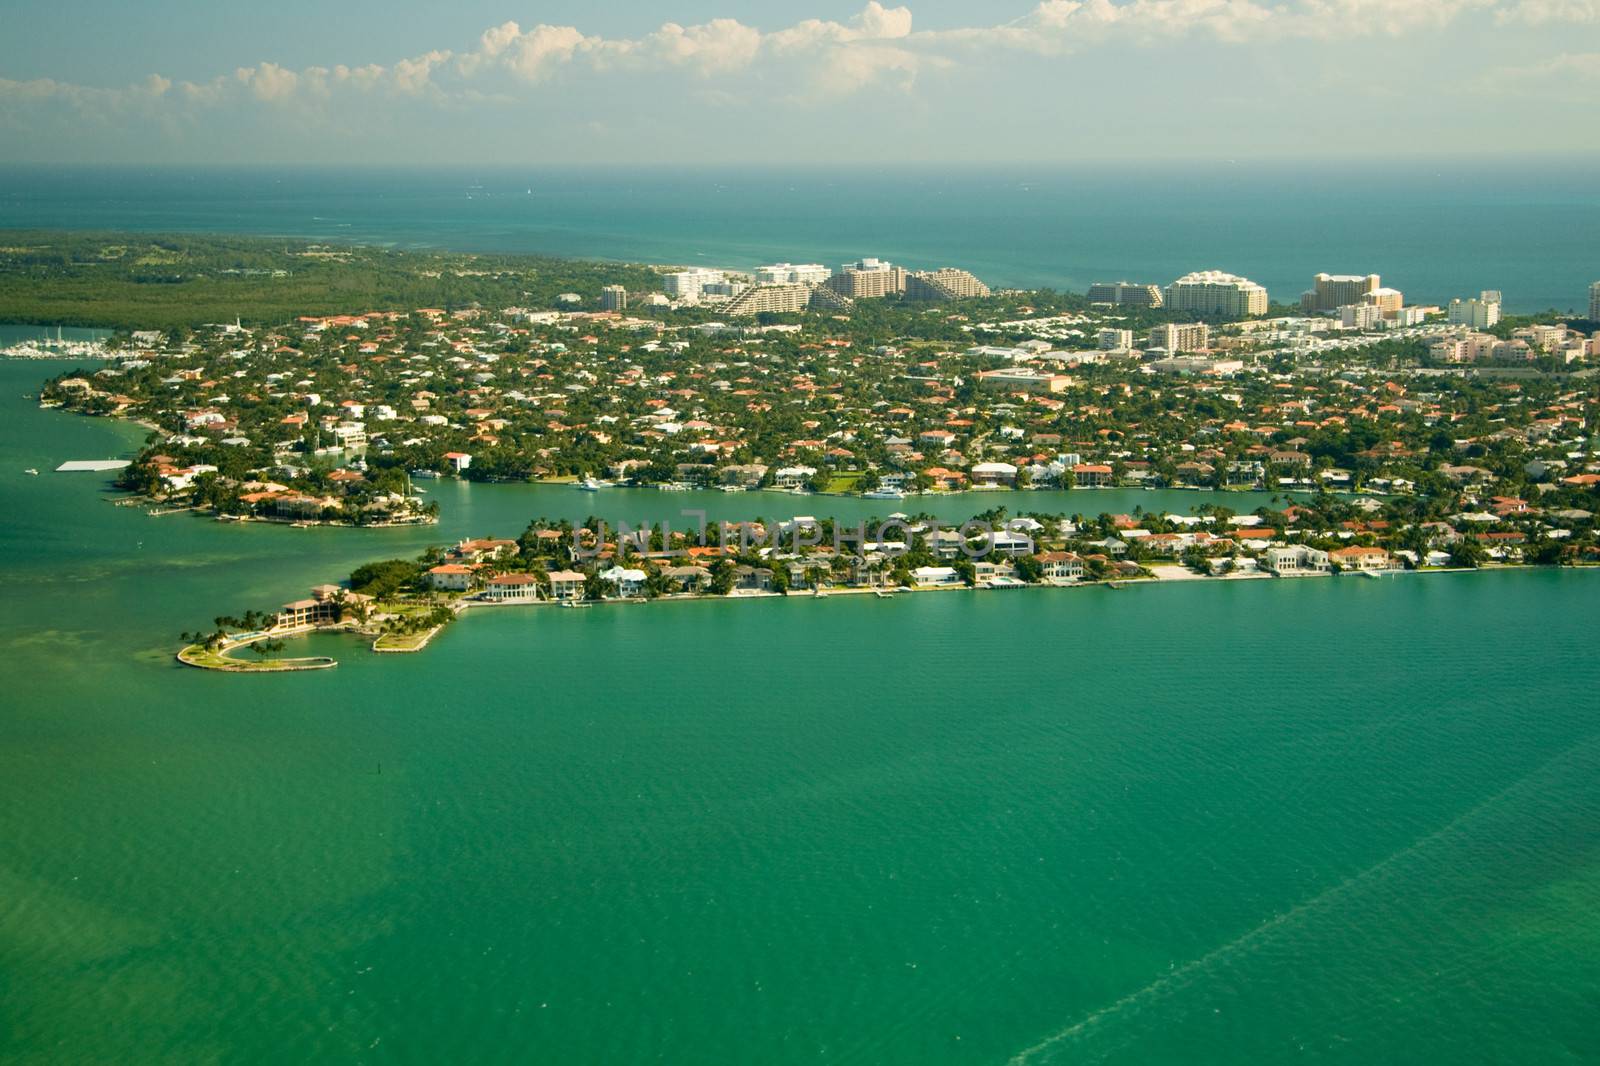 Aerial view of a city at the waterfront, Miami, Florida, USA